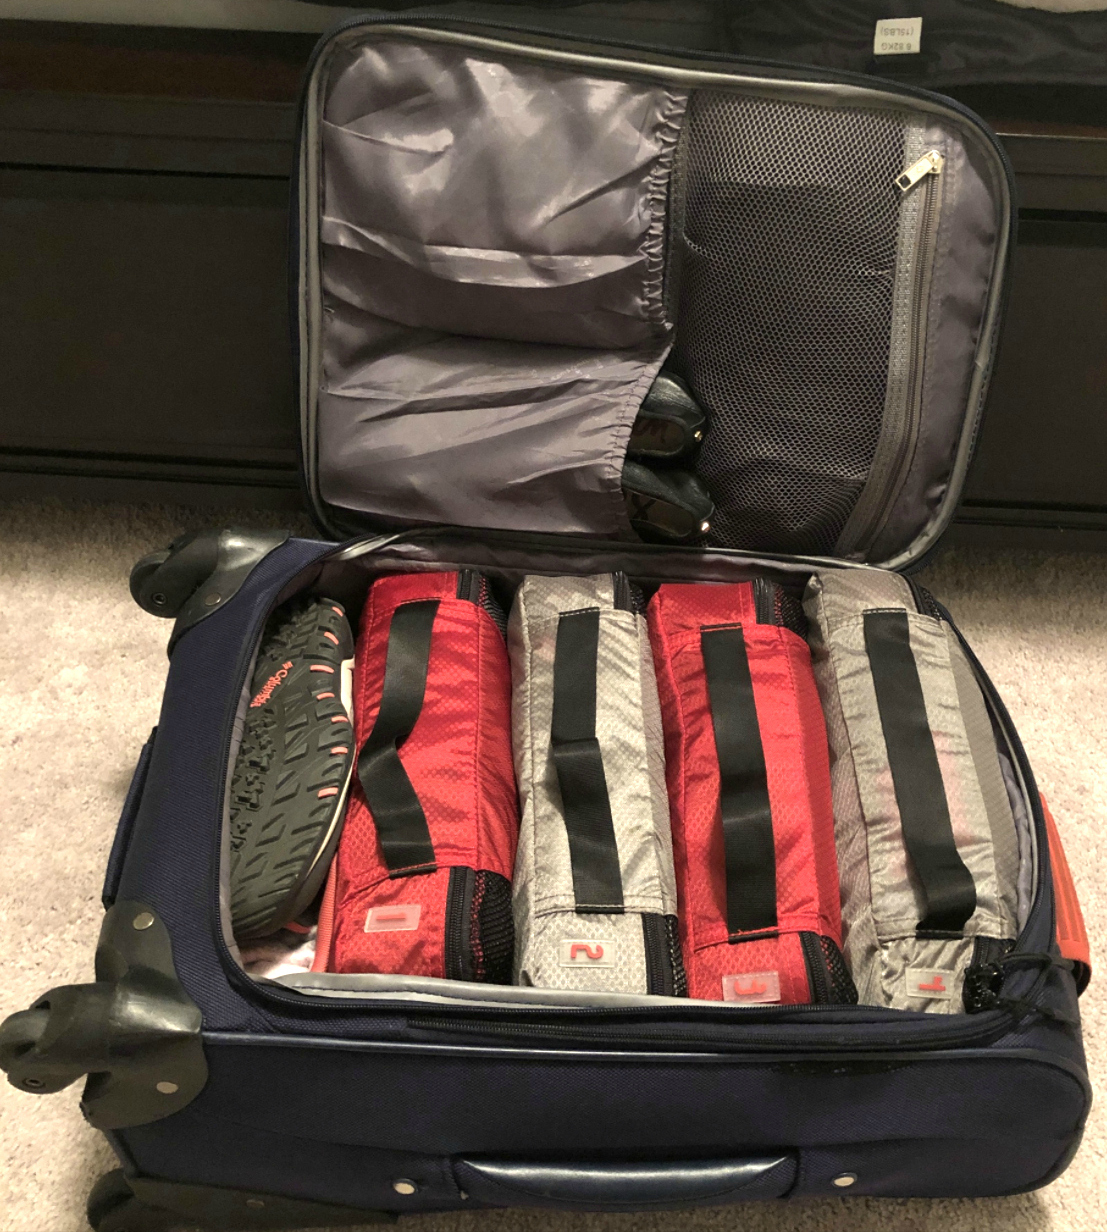 best-packing-cubes-for-carry-on